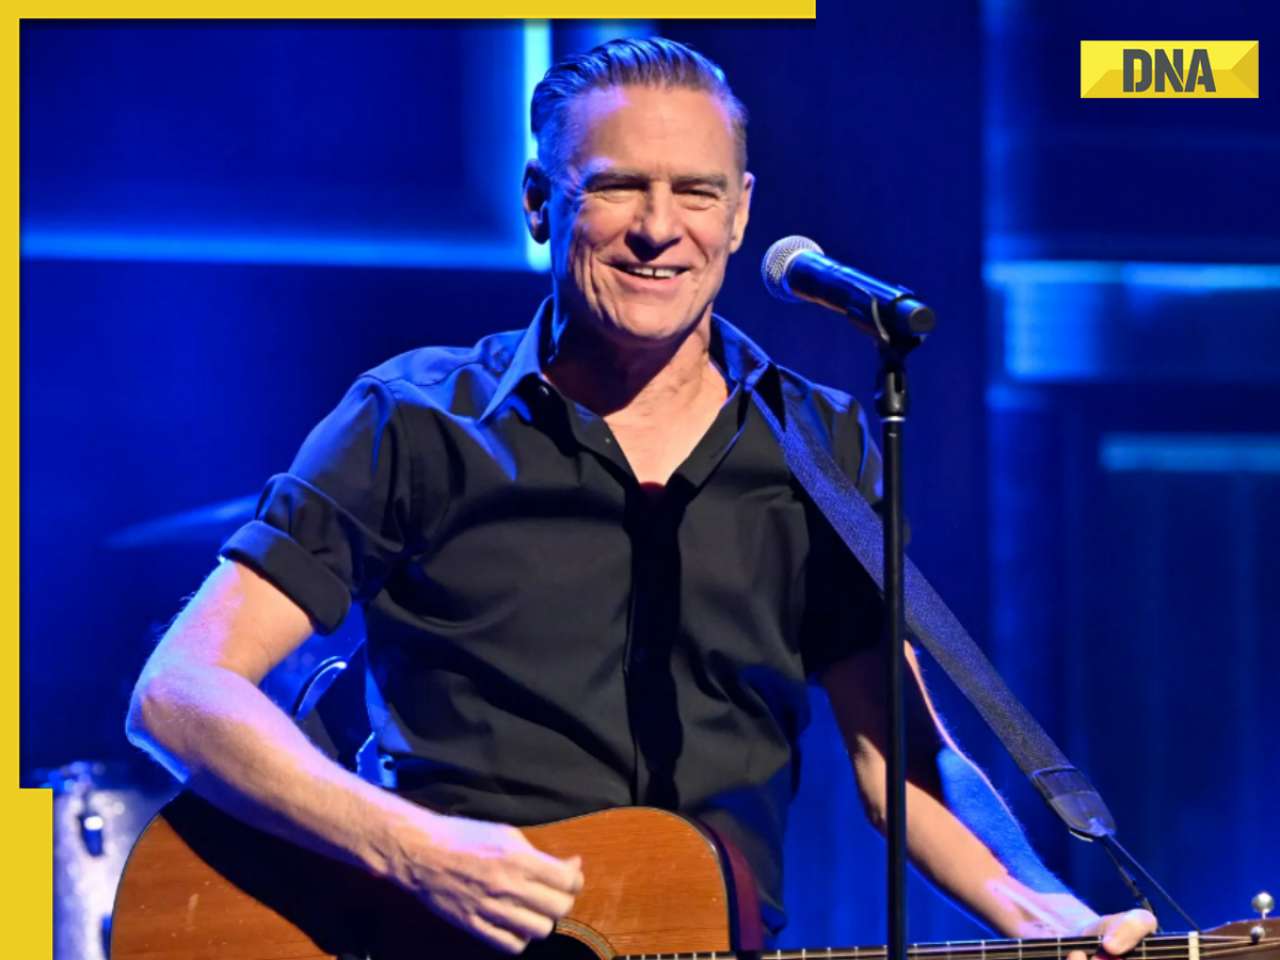 Bryan Adams to perform in five Indian cities in December, here's how to watch him live